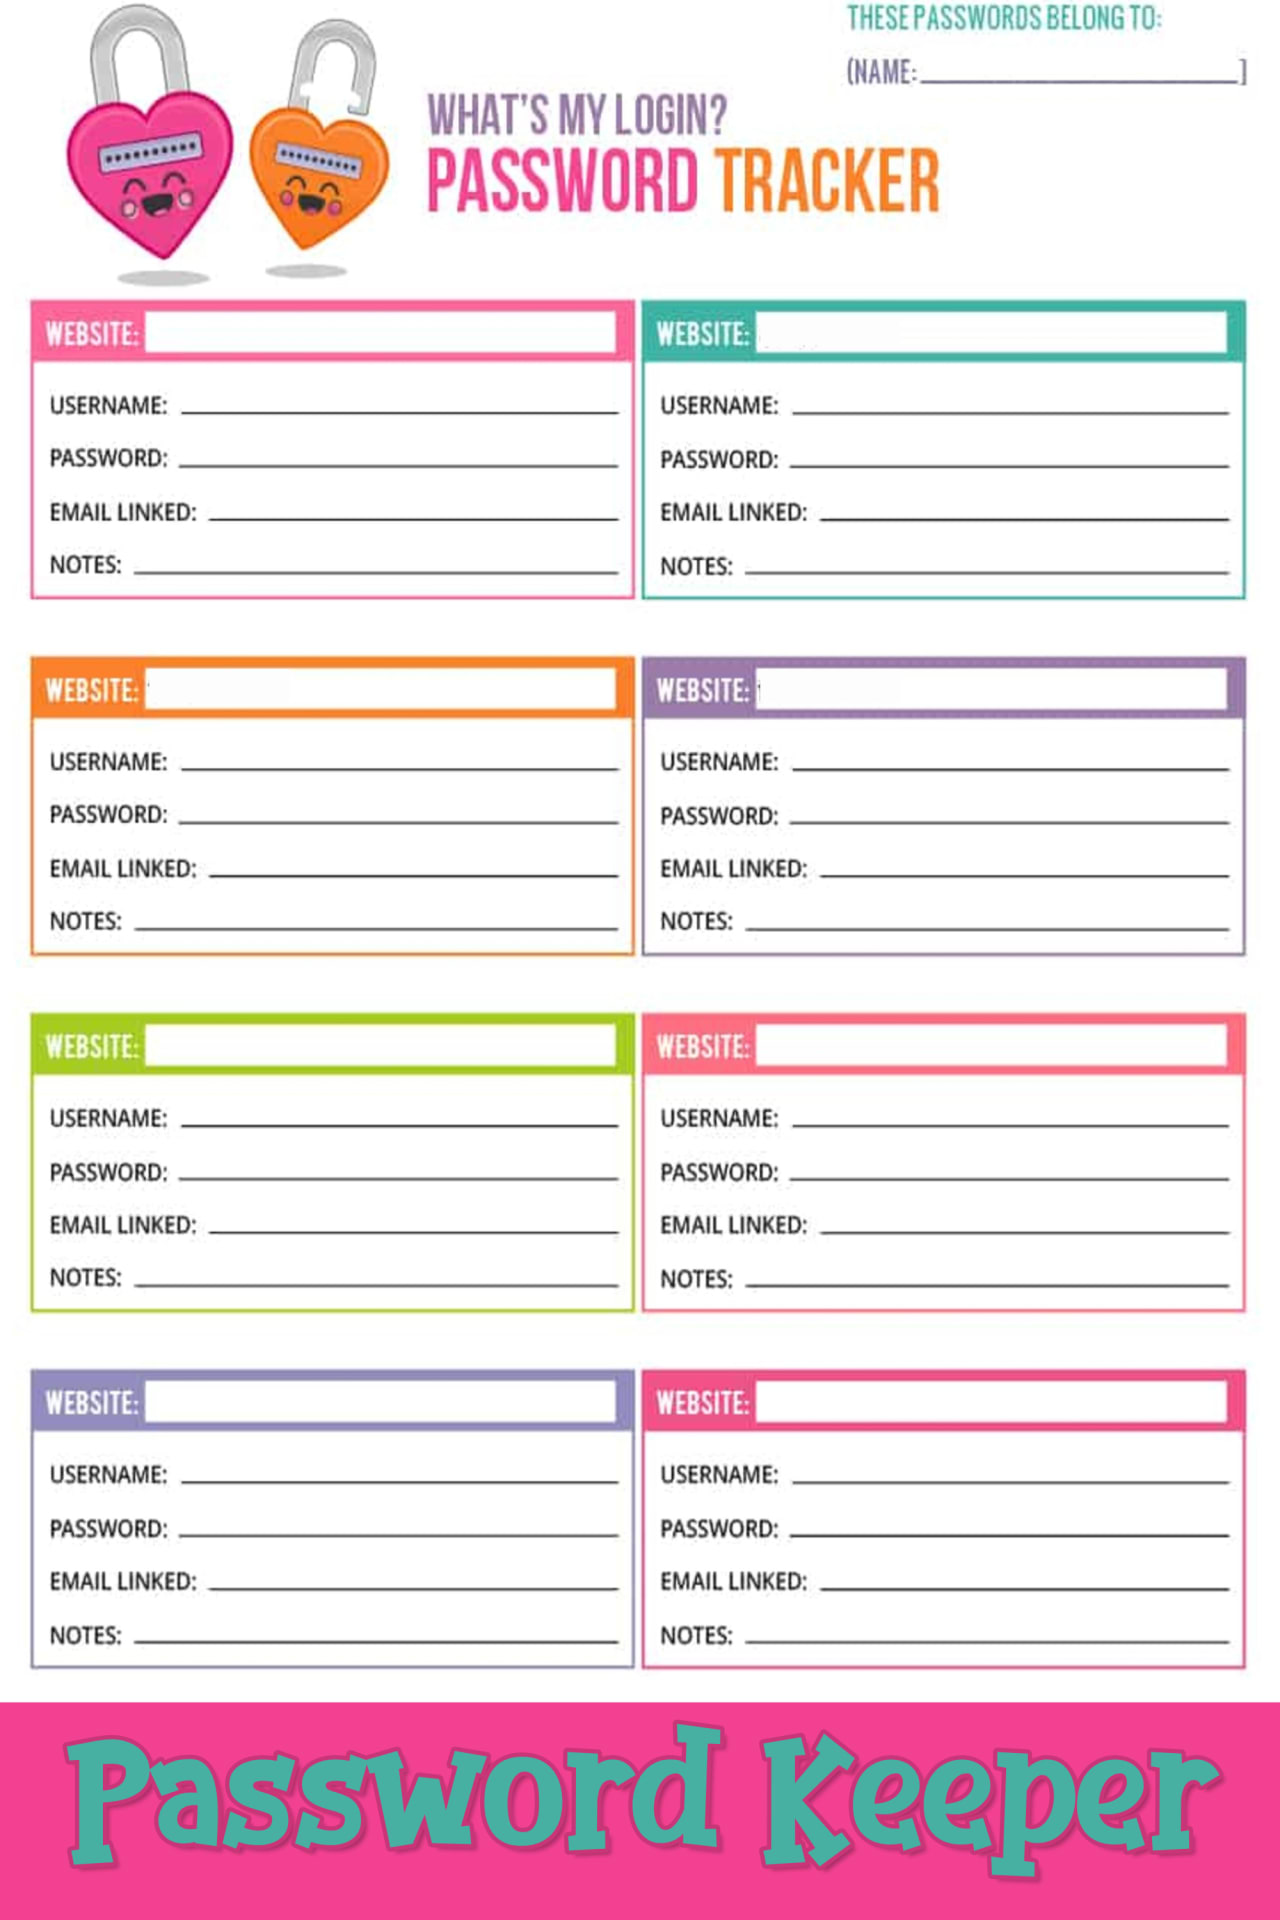 Free Password Trackers and Password Keeper Printable PDFs - how to organize website passwords on paper with a printable password keeper to make a DIY password journal or password organizer binder - it's like your own password vault to track all your online passwords!  Download your free printable password organizers worksheets to make a DIY password book with these free home organizing printables